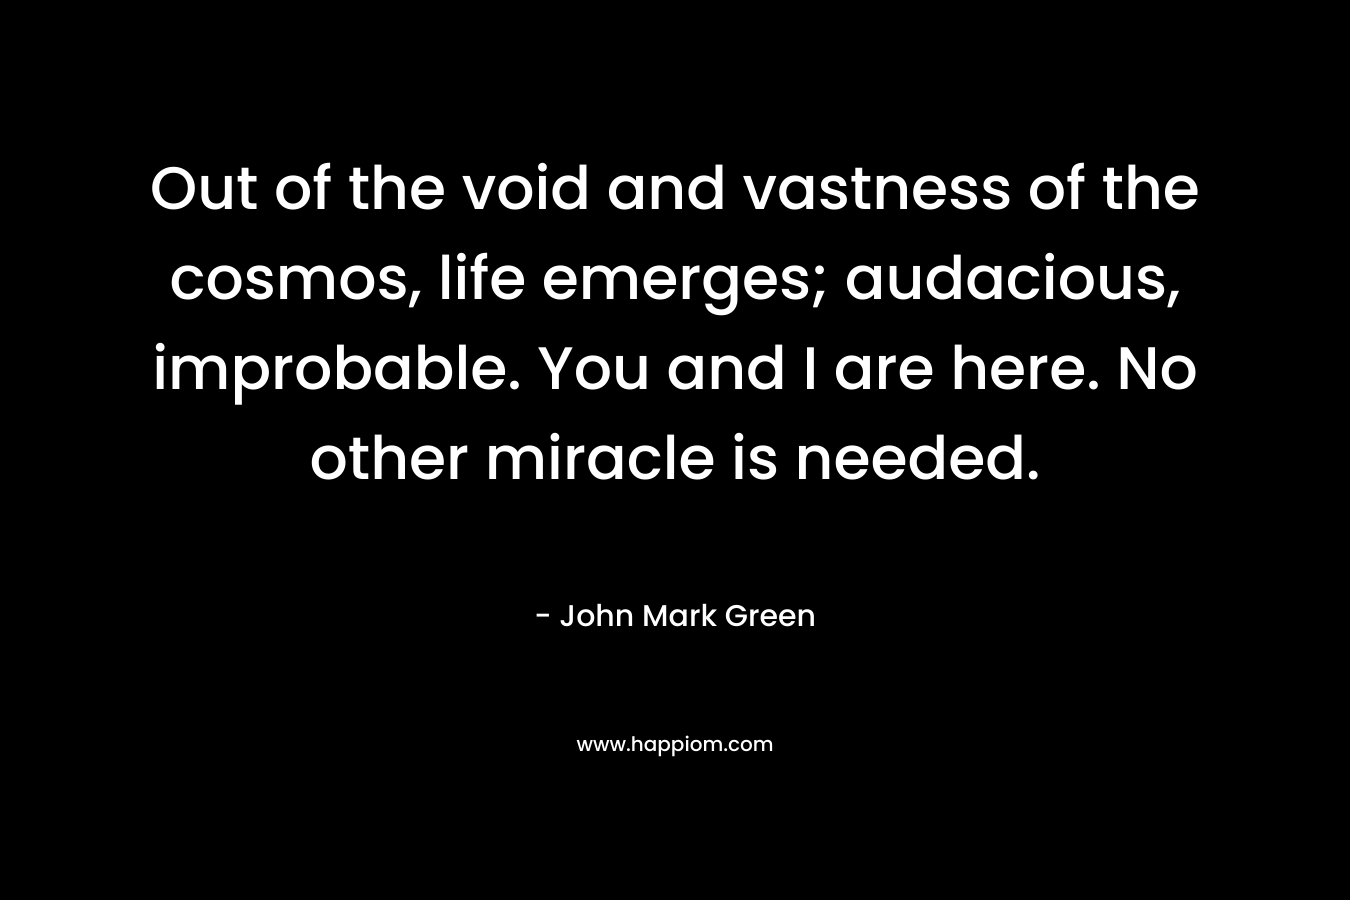 Out of the void and vastness of the cosmos, life emerges; audacious, improbable. You and I are here. No other miracle is needed. – John Mark Green